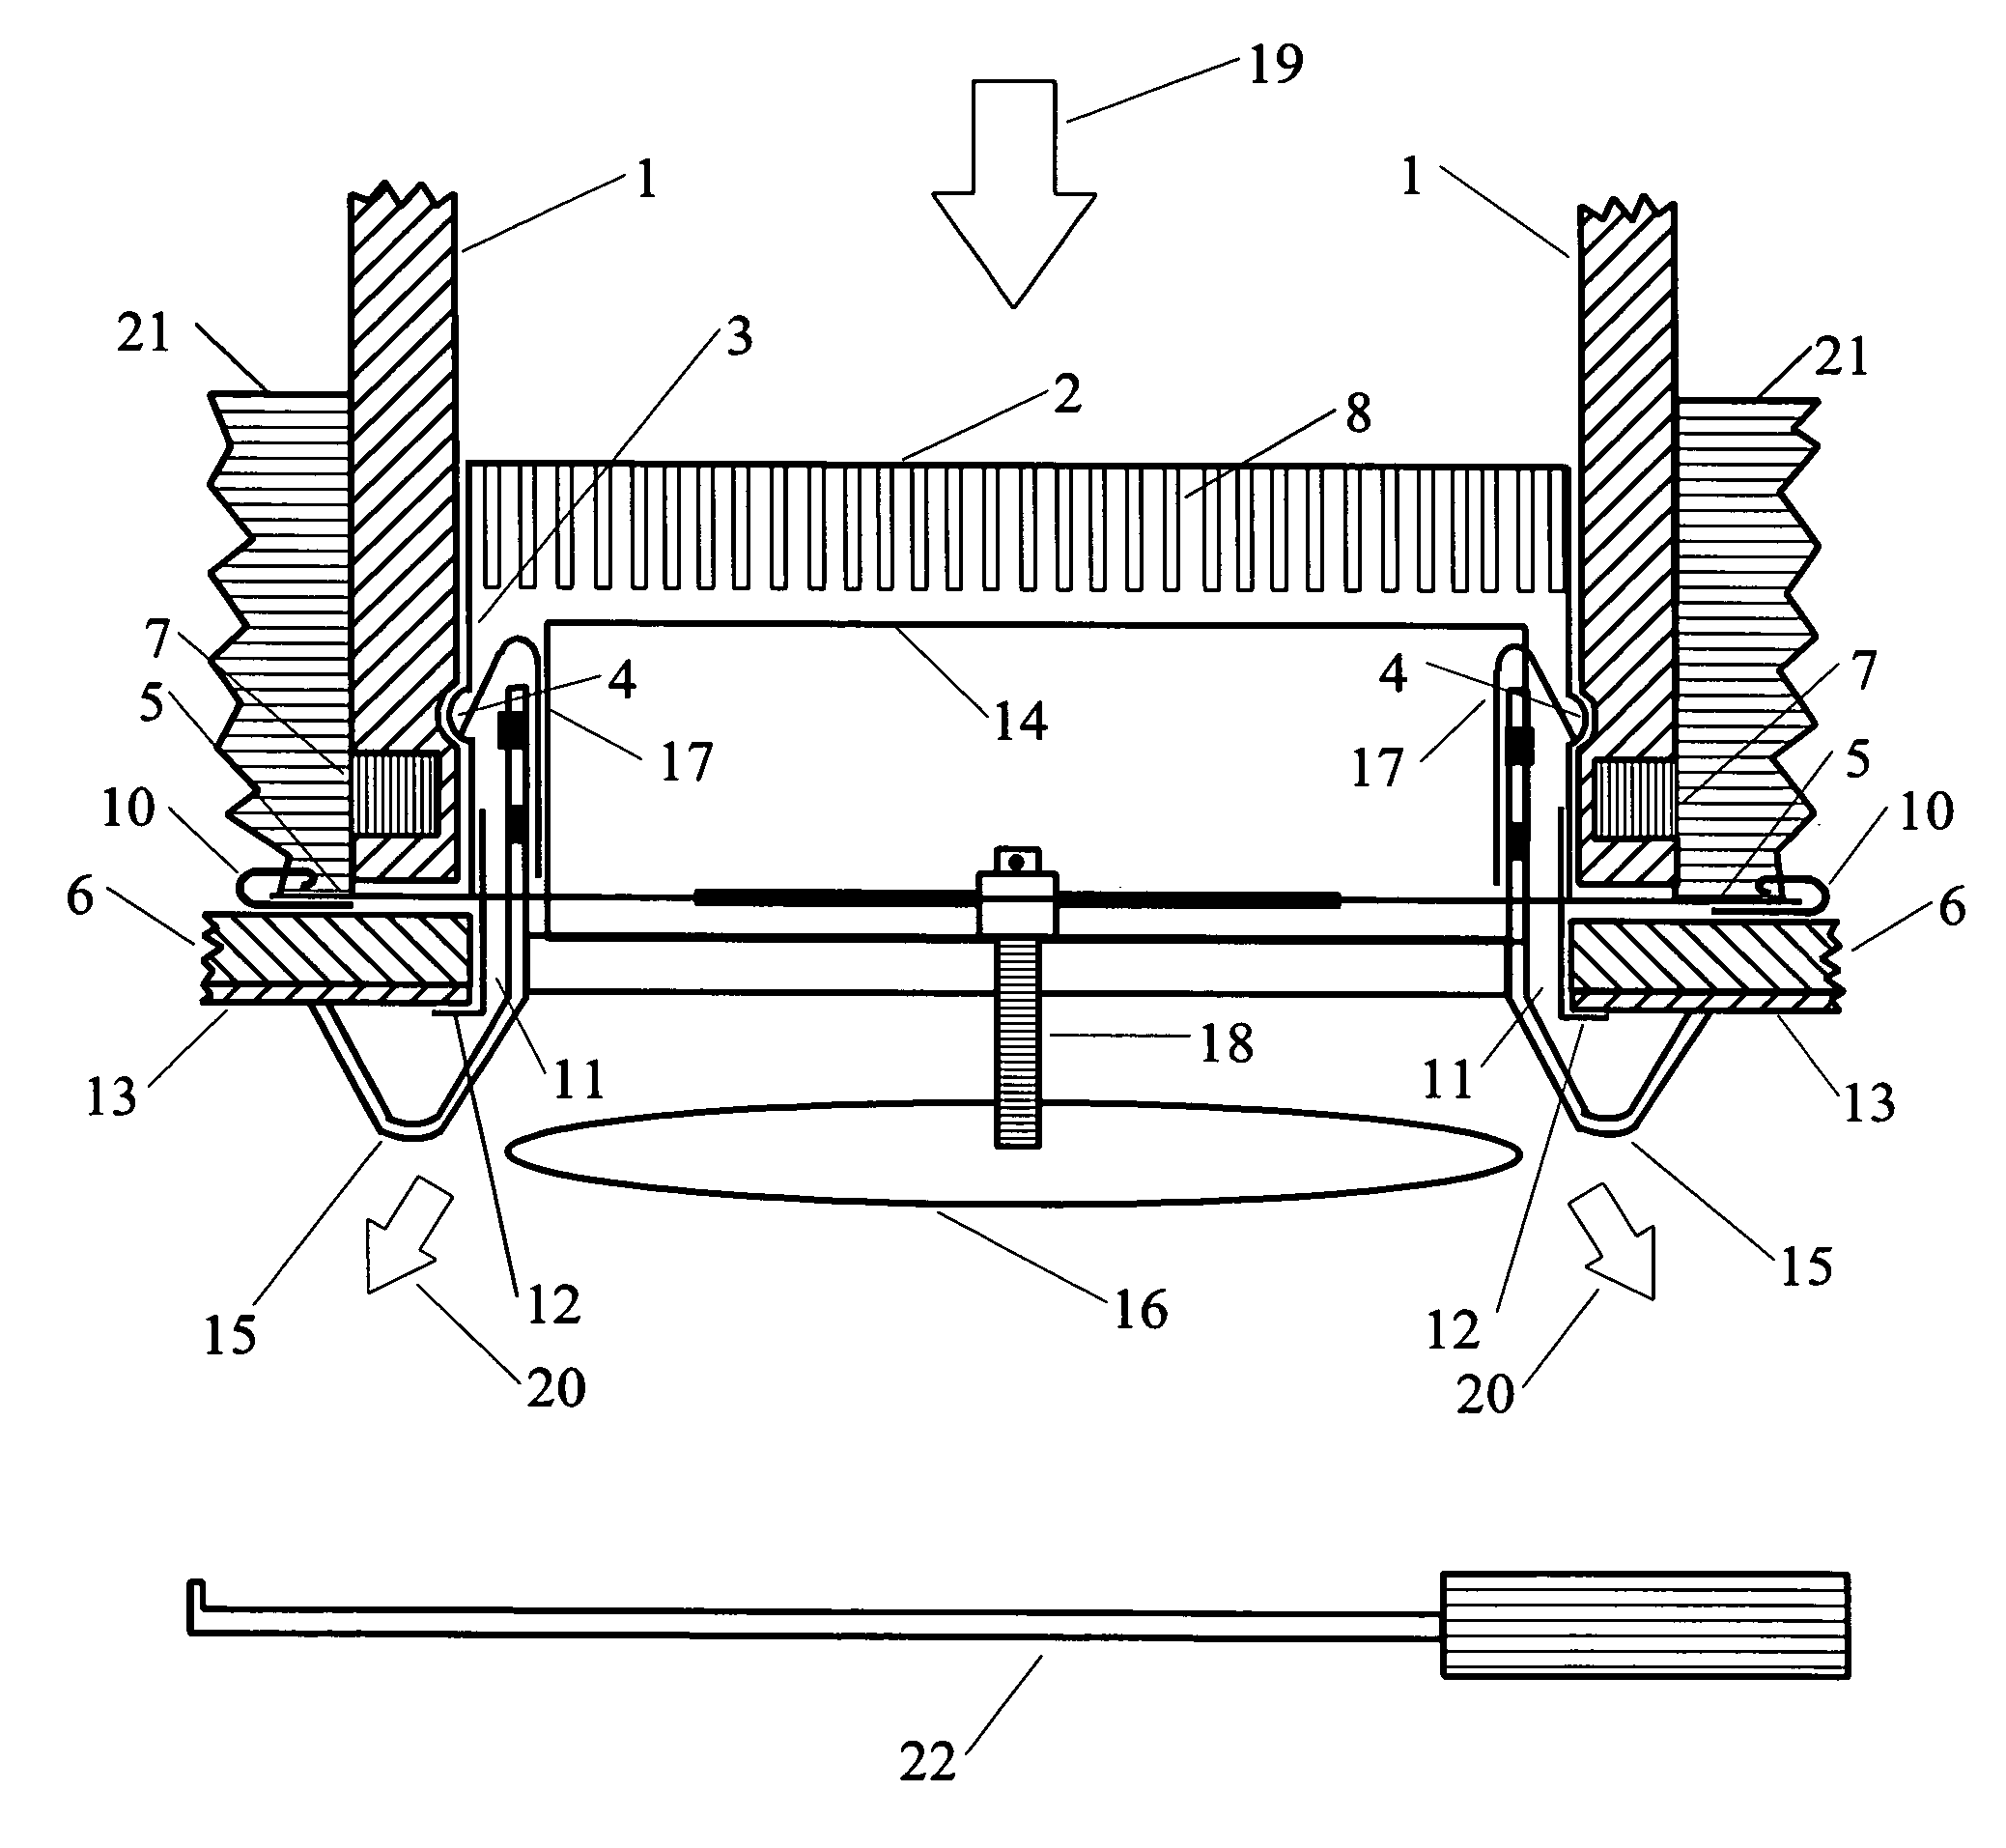 Method and apparatus for eliminating register boxes, improving penetration sealing, improving airflow and reducing the labor costs to install ceiling registers